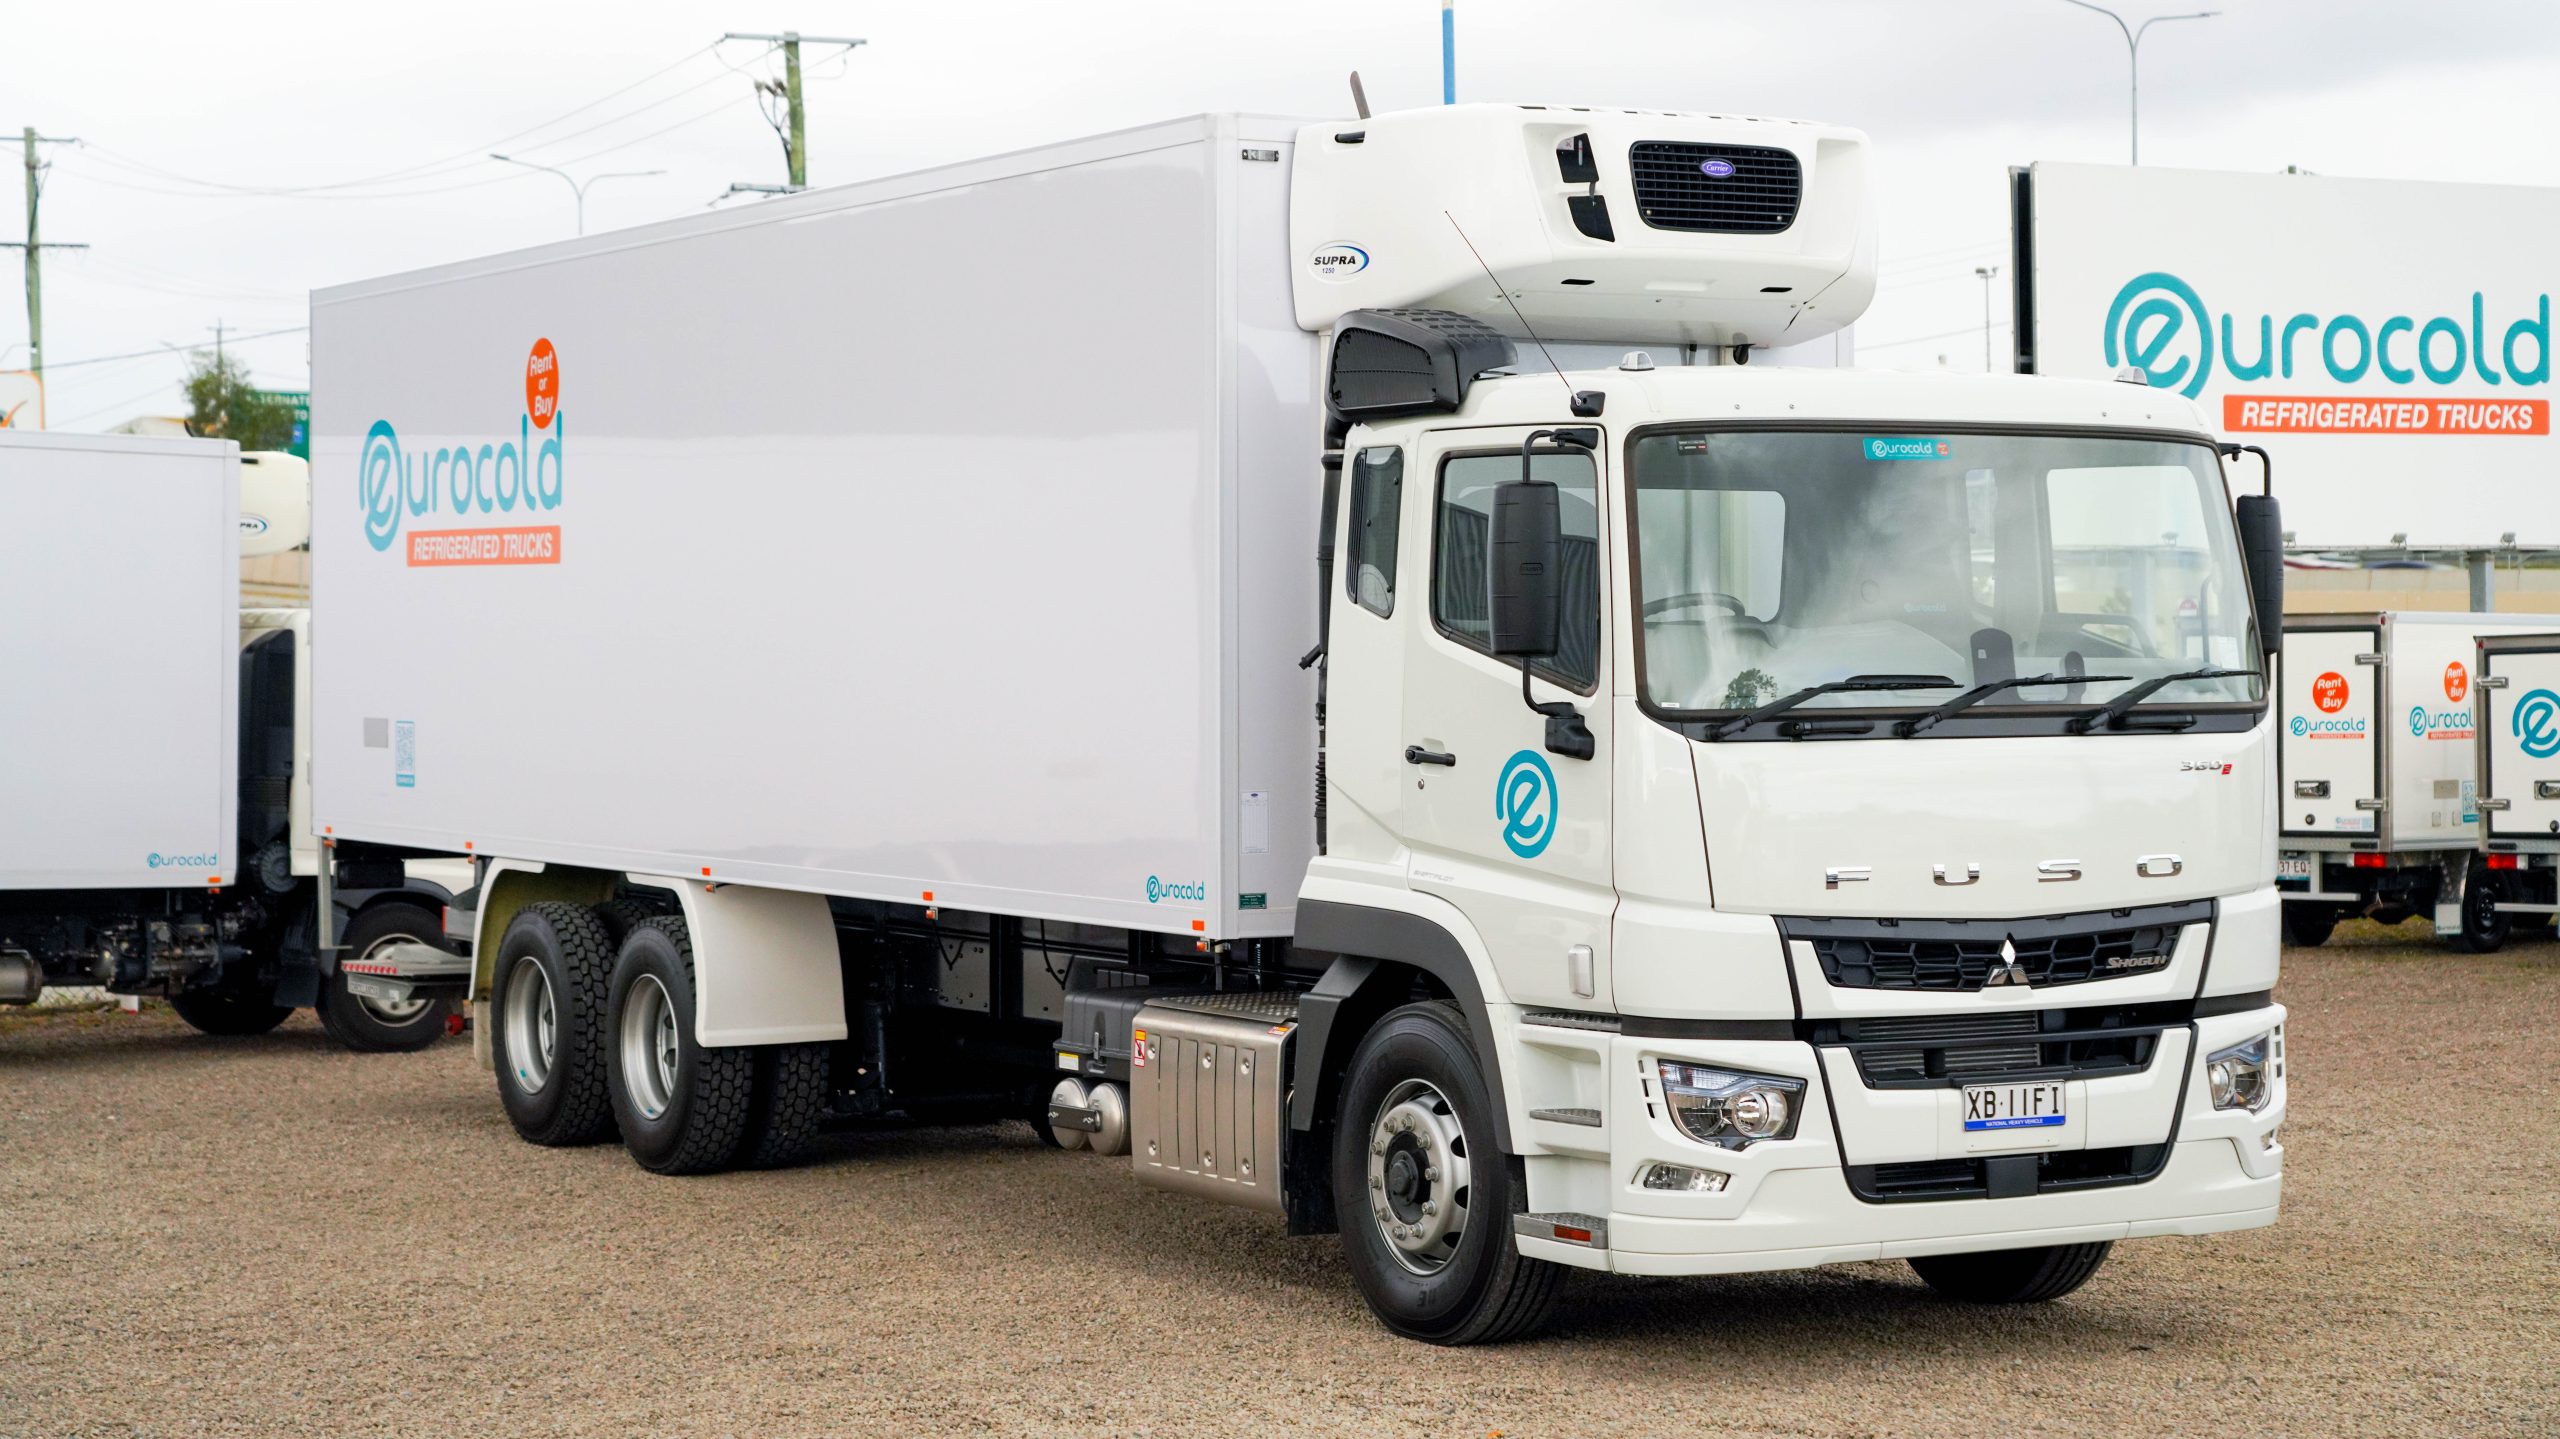 Eurocold announce nationwide & international expansion supporting refrigerated transport industry